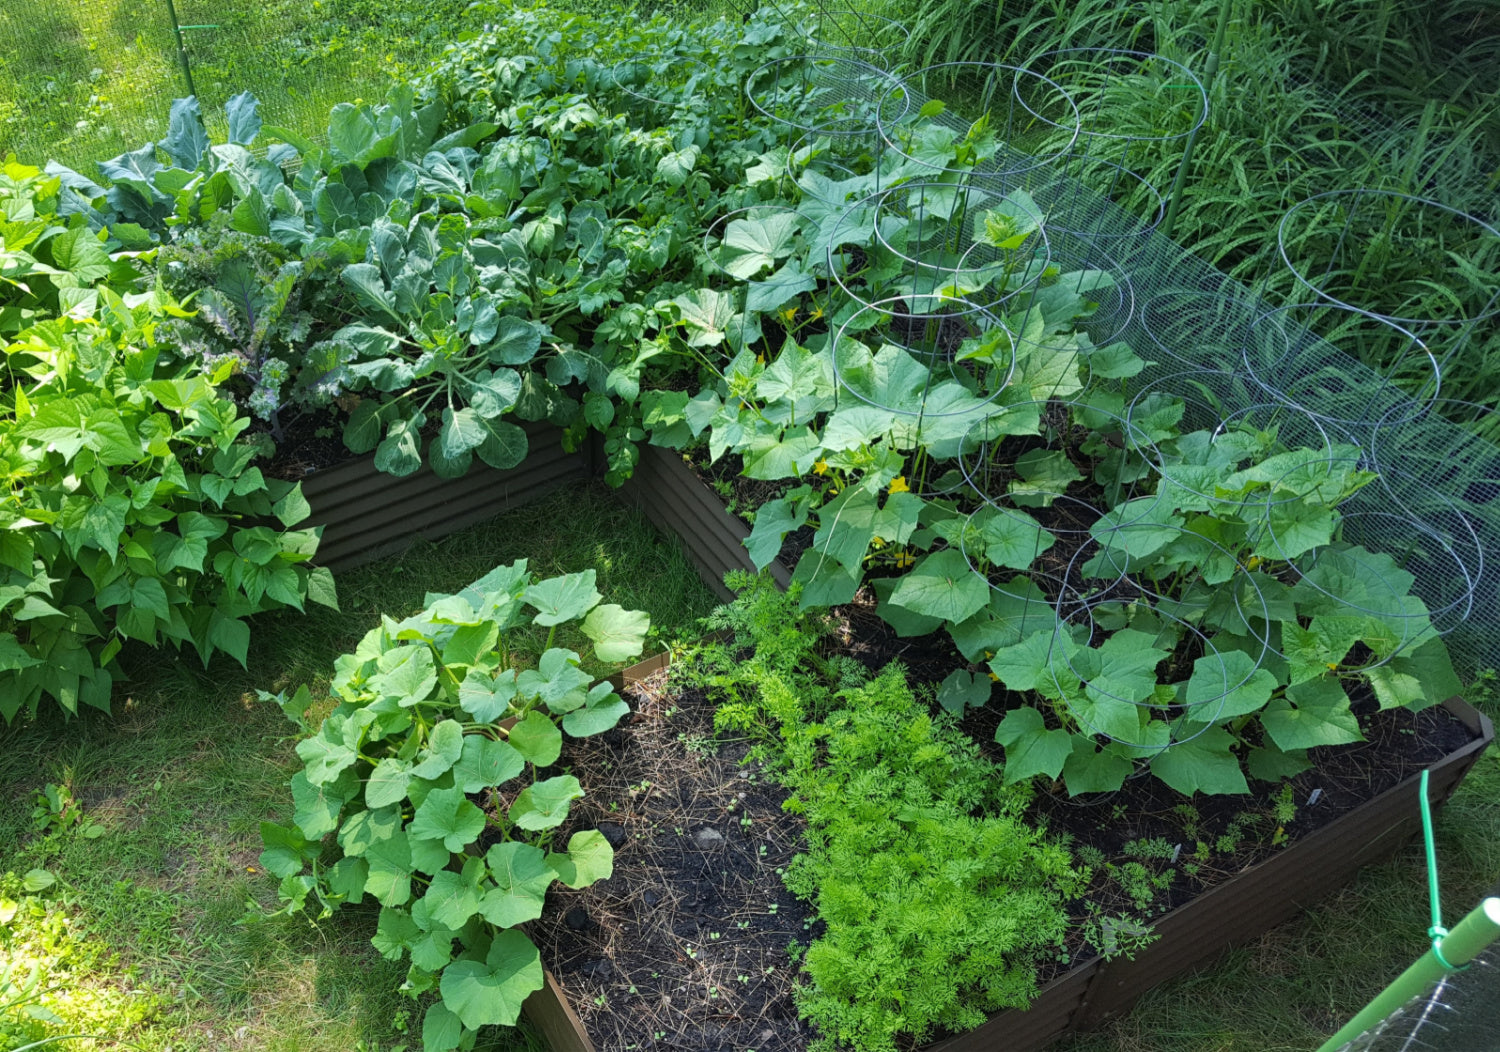 rustic mezcla garden bed with melons, cucumbers, brussel sprouts